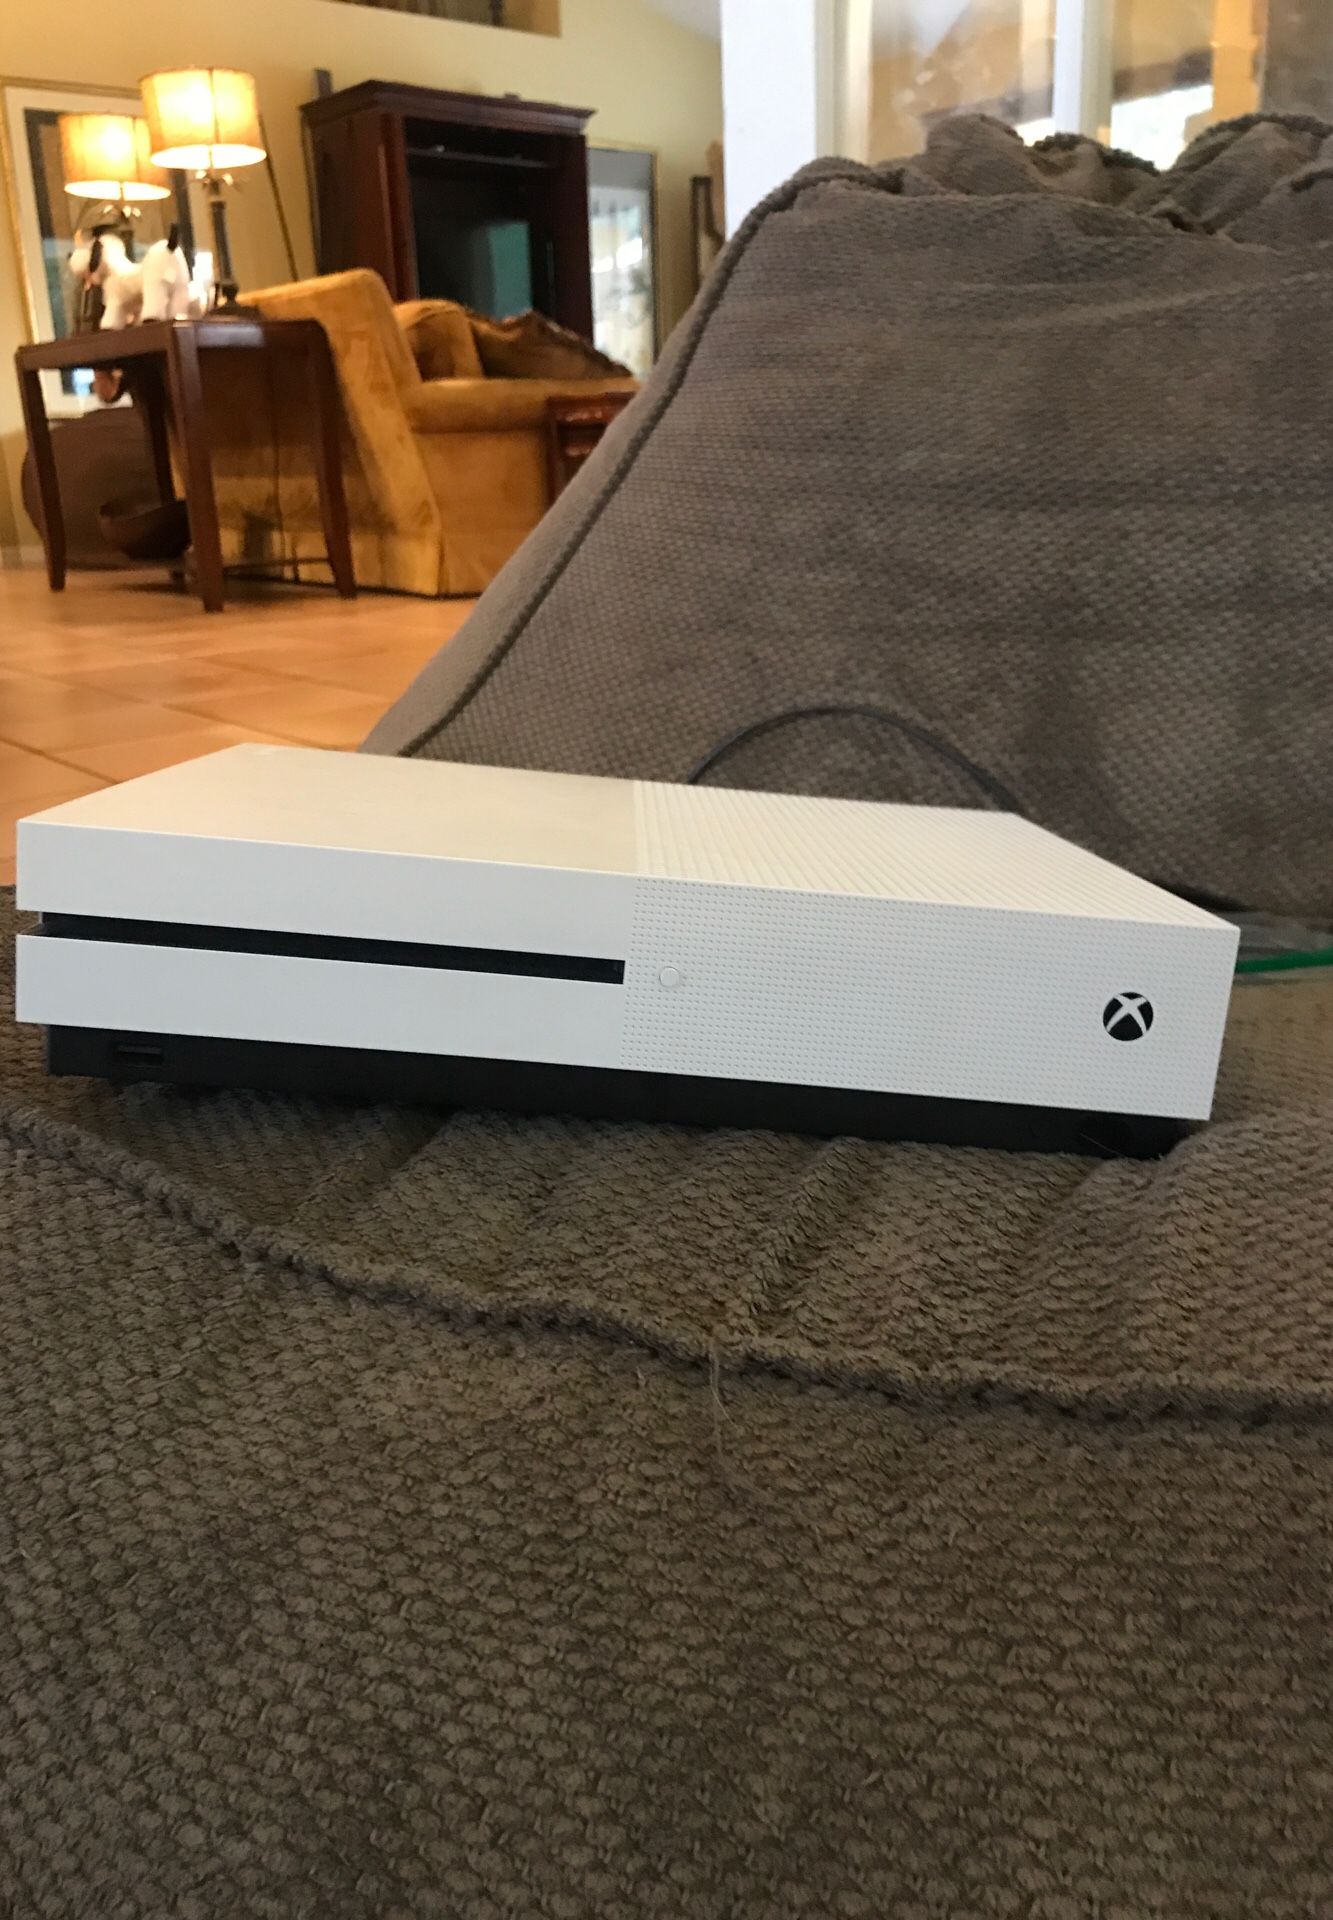 Xbox one s and more